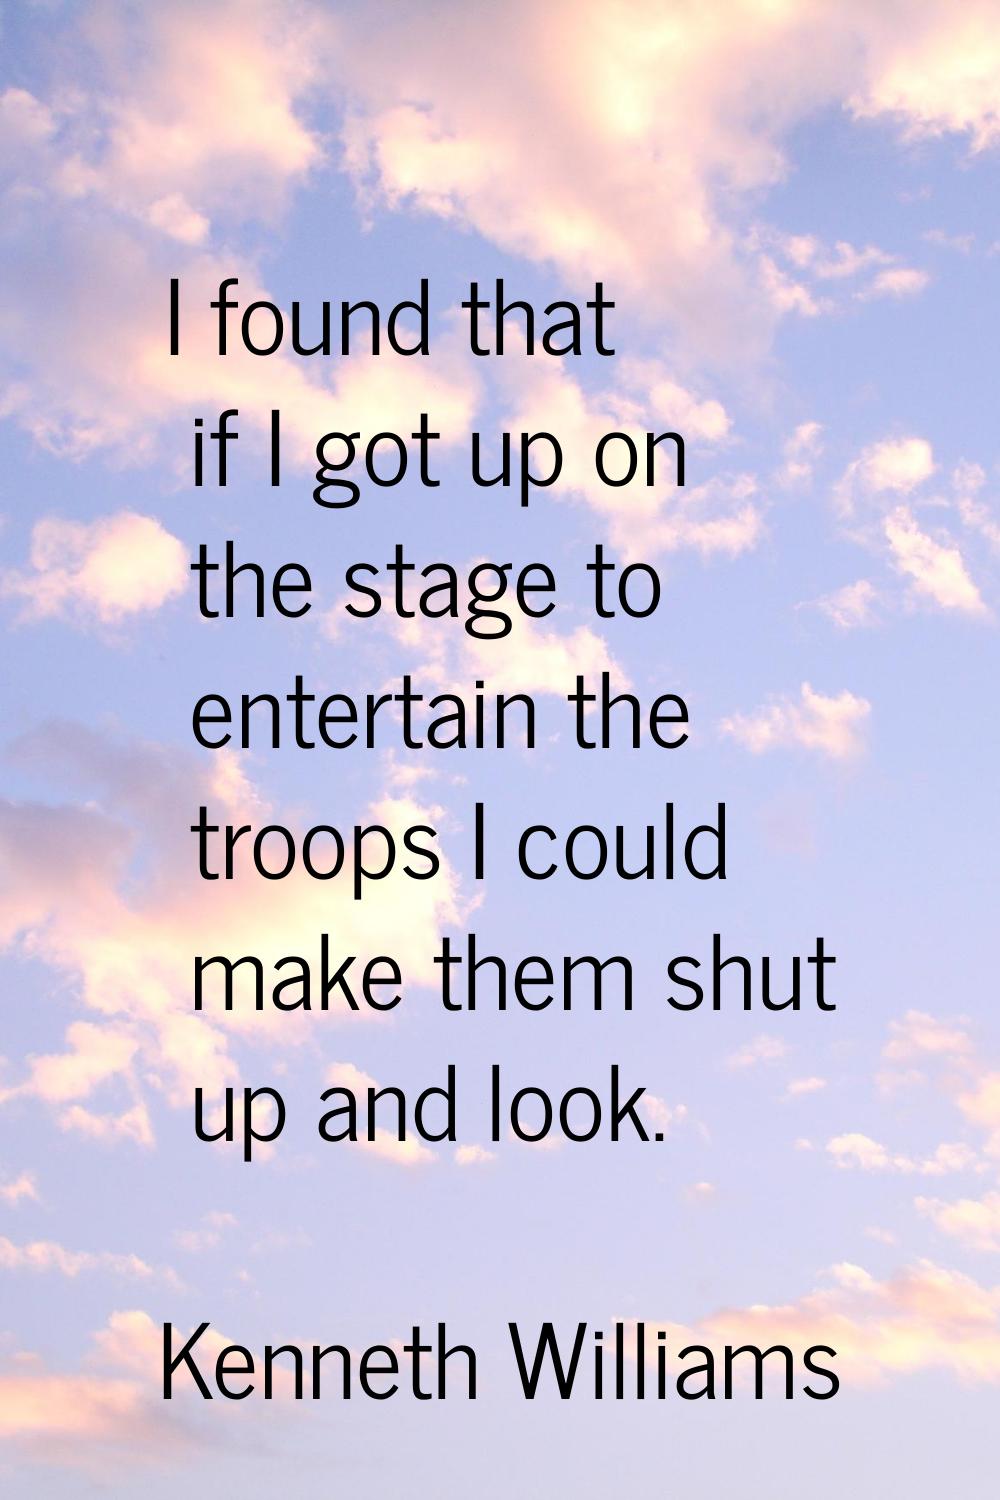 I found that if I got up on the stage to entertain the troops I could make them shut up and look.